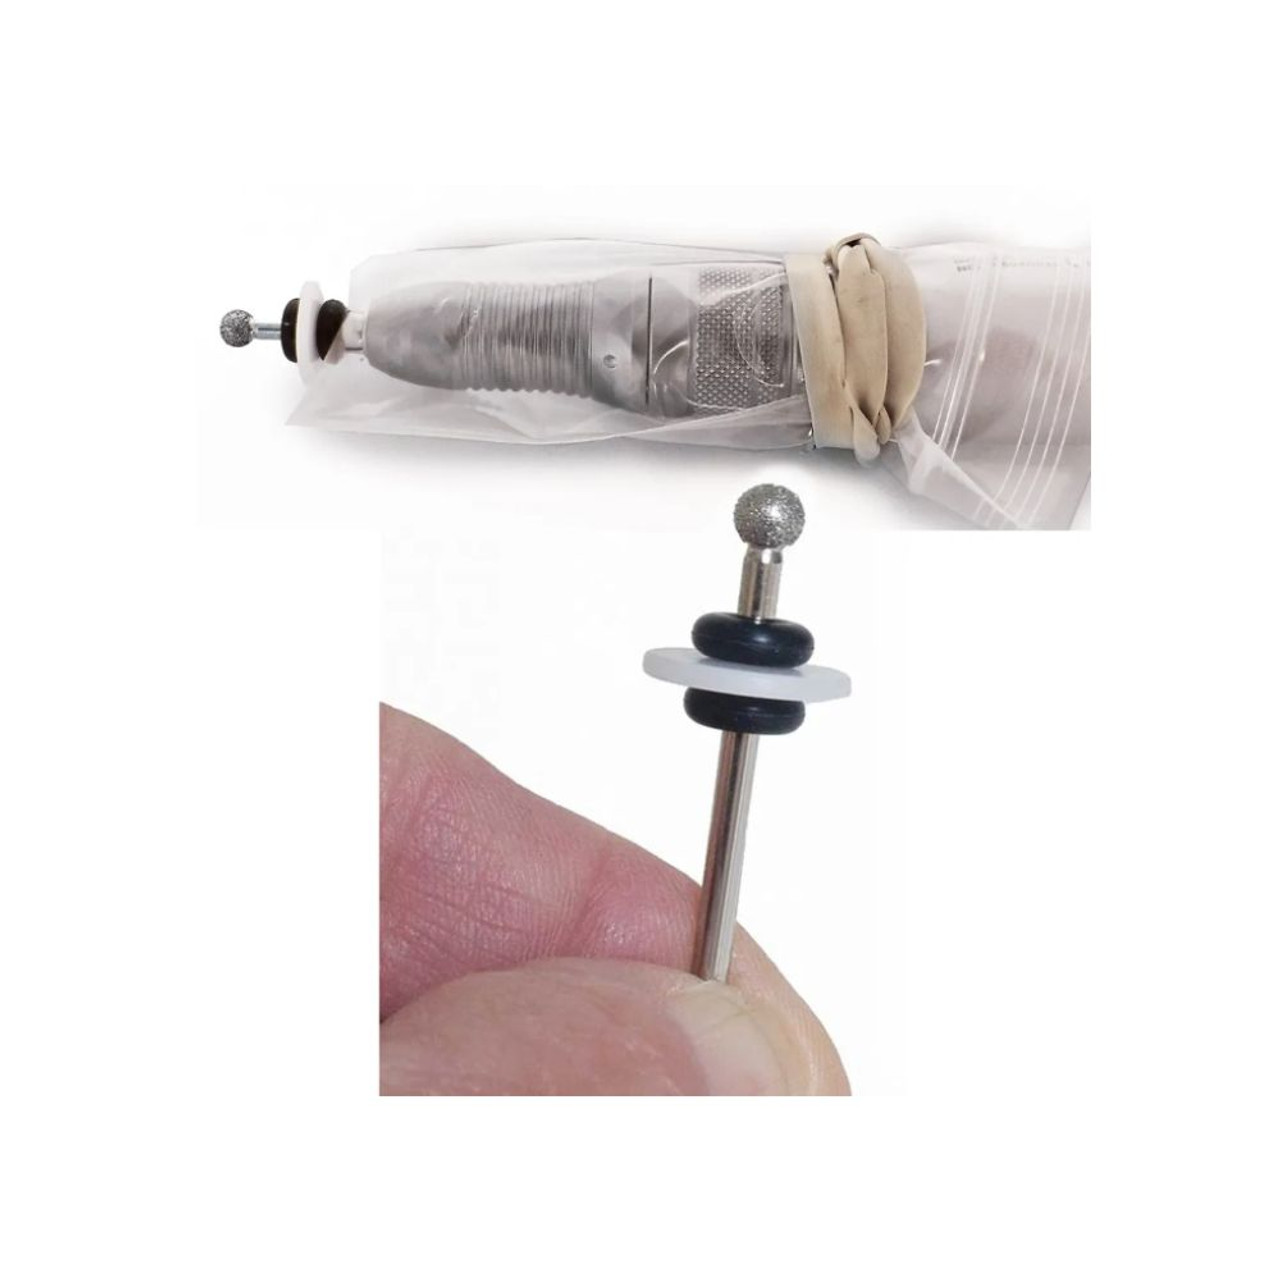 Use when water or coolant are needed for your work to prevent damage to the handpiece